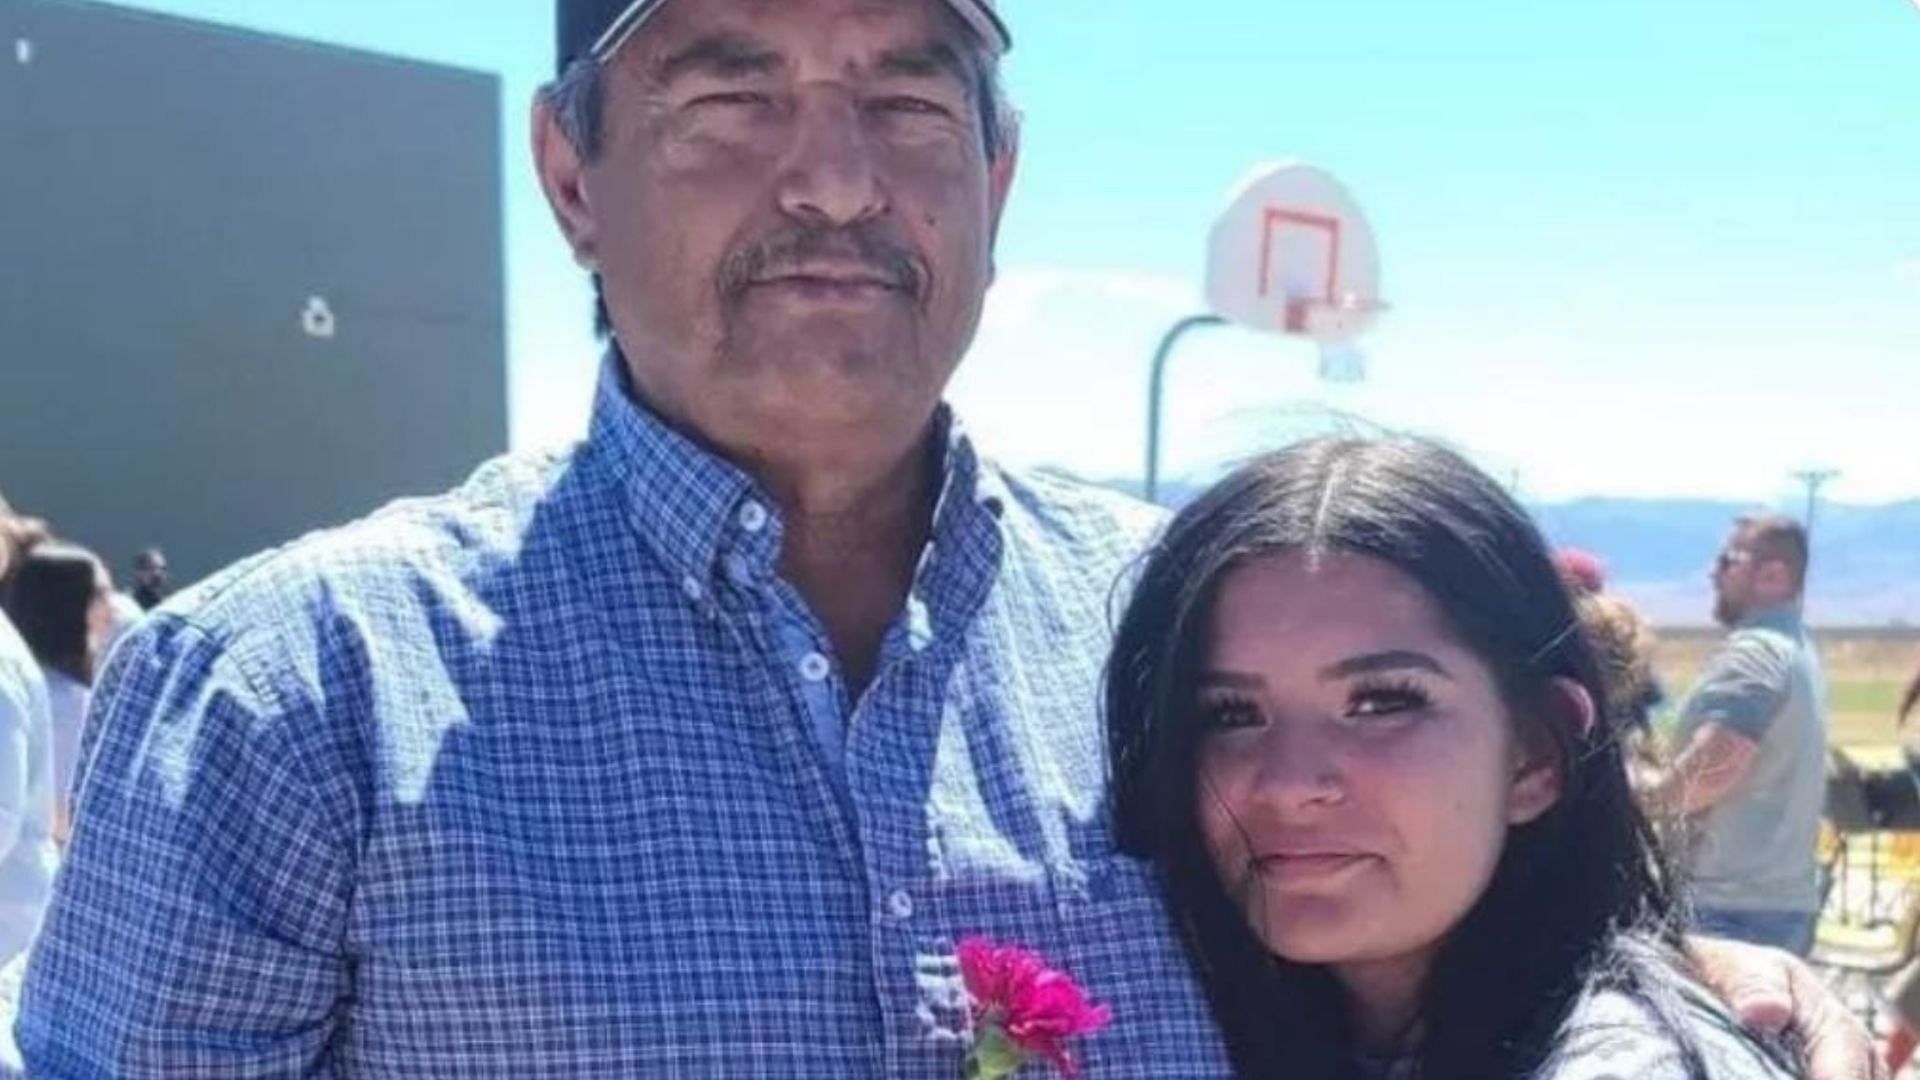 Family sets up a fundraiser for the funeral expenses of 14-year-old Aaliyah Salazar (Image via GoFundMe)